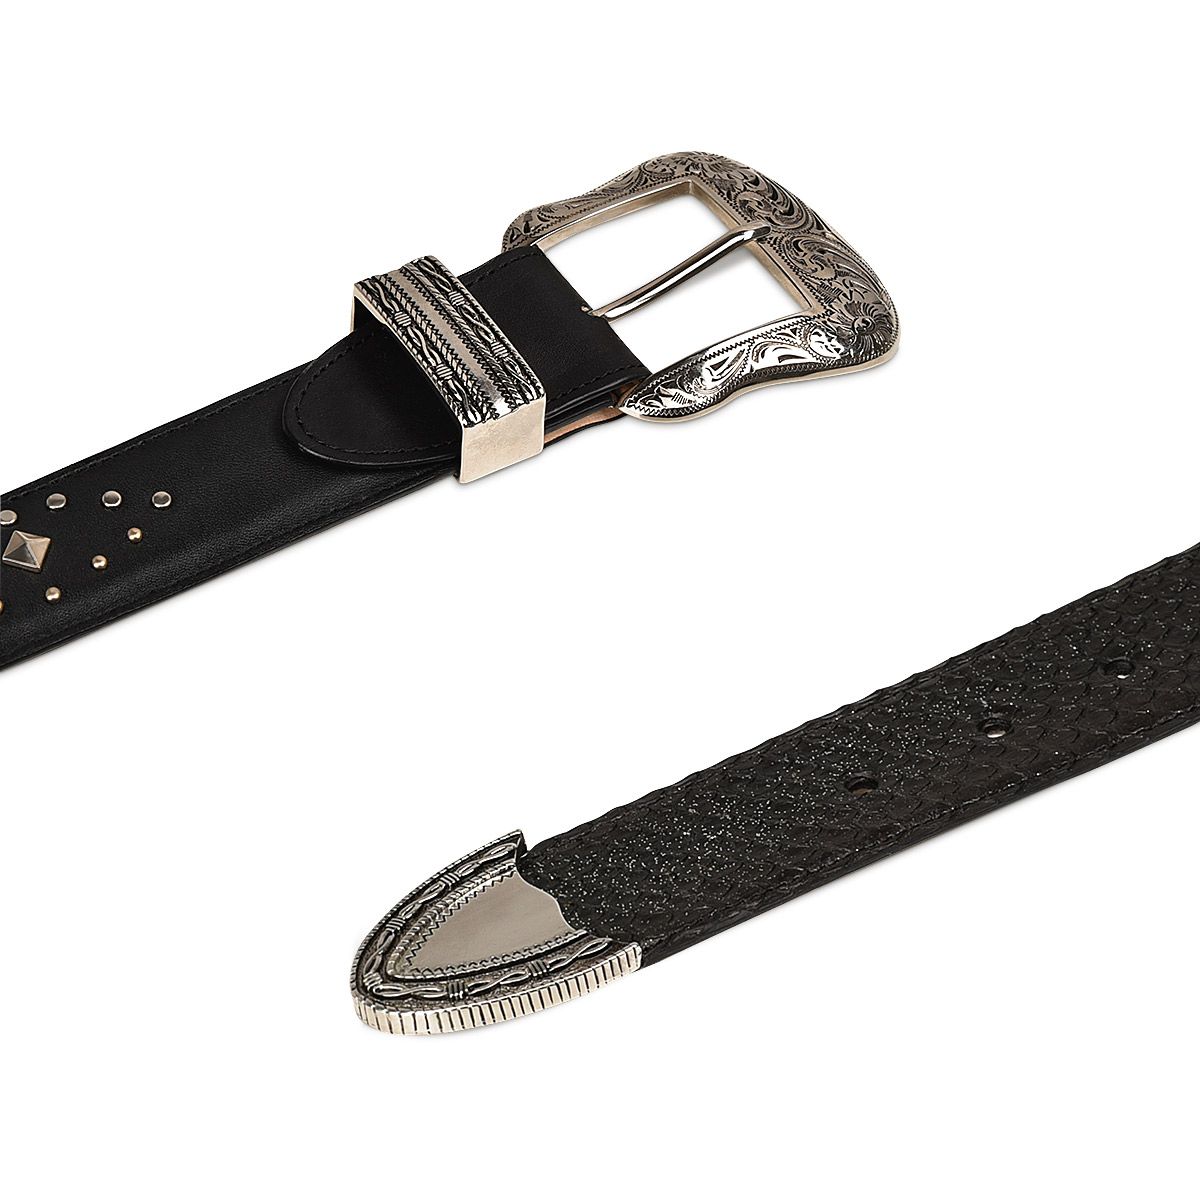 Handwoven black exotic leather cowgirl belt